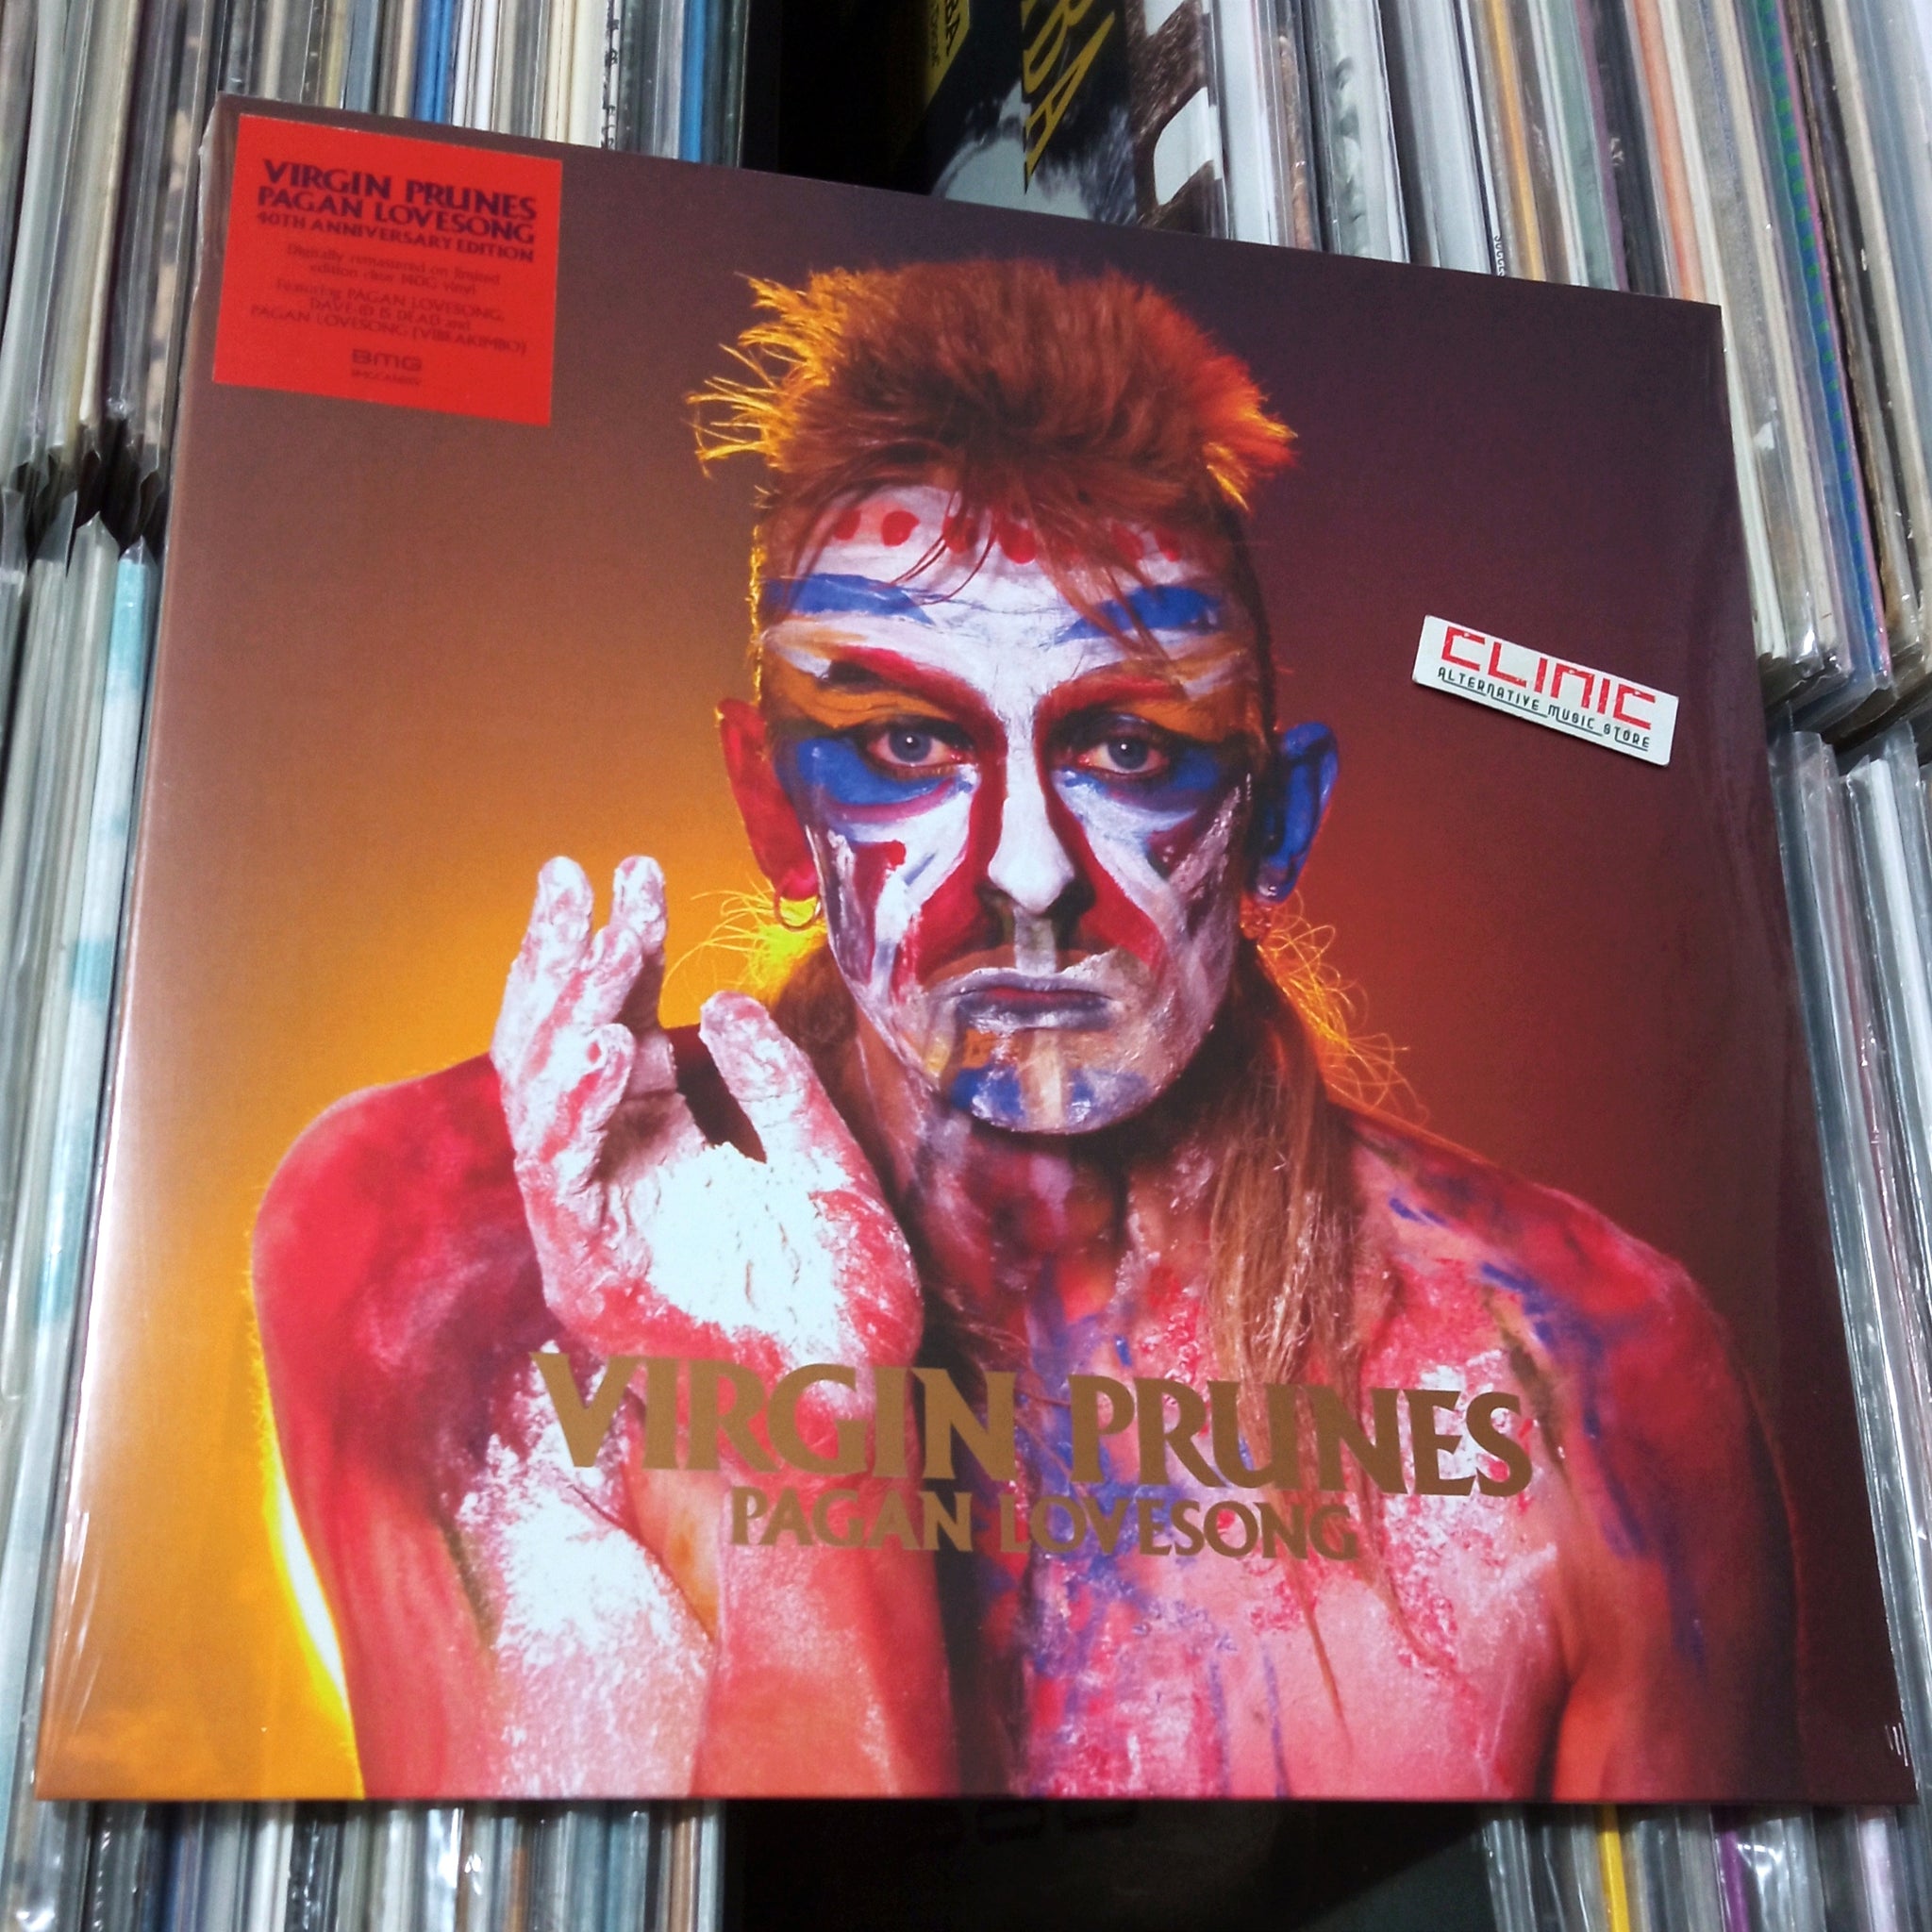 12" - VIRGIN PRUNES - PAGAN LOVESONG - Record Store Day